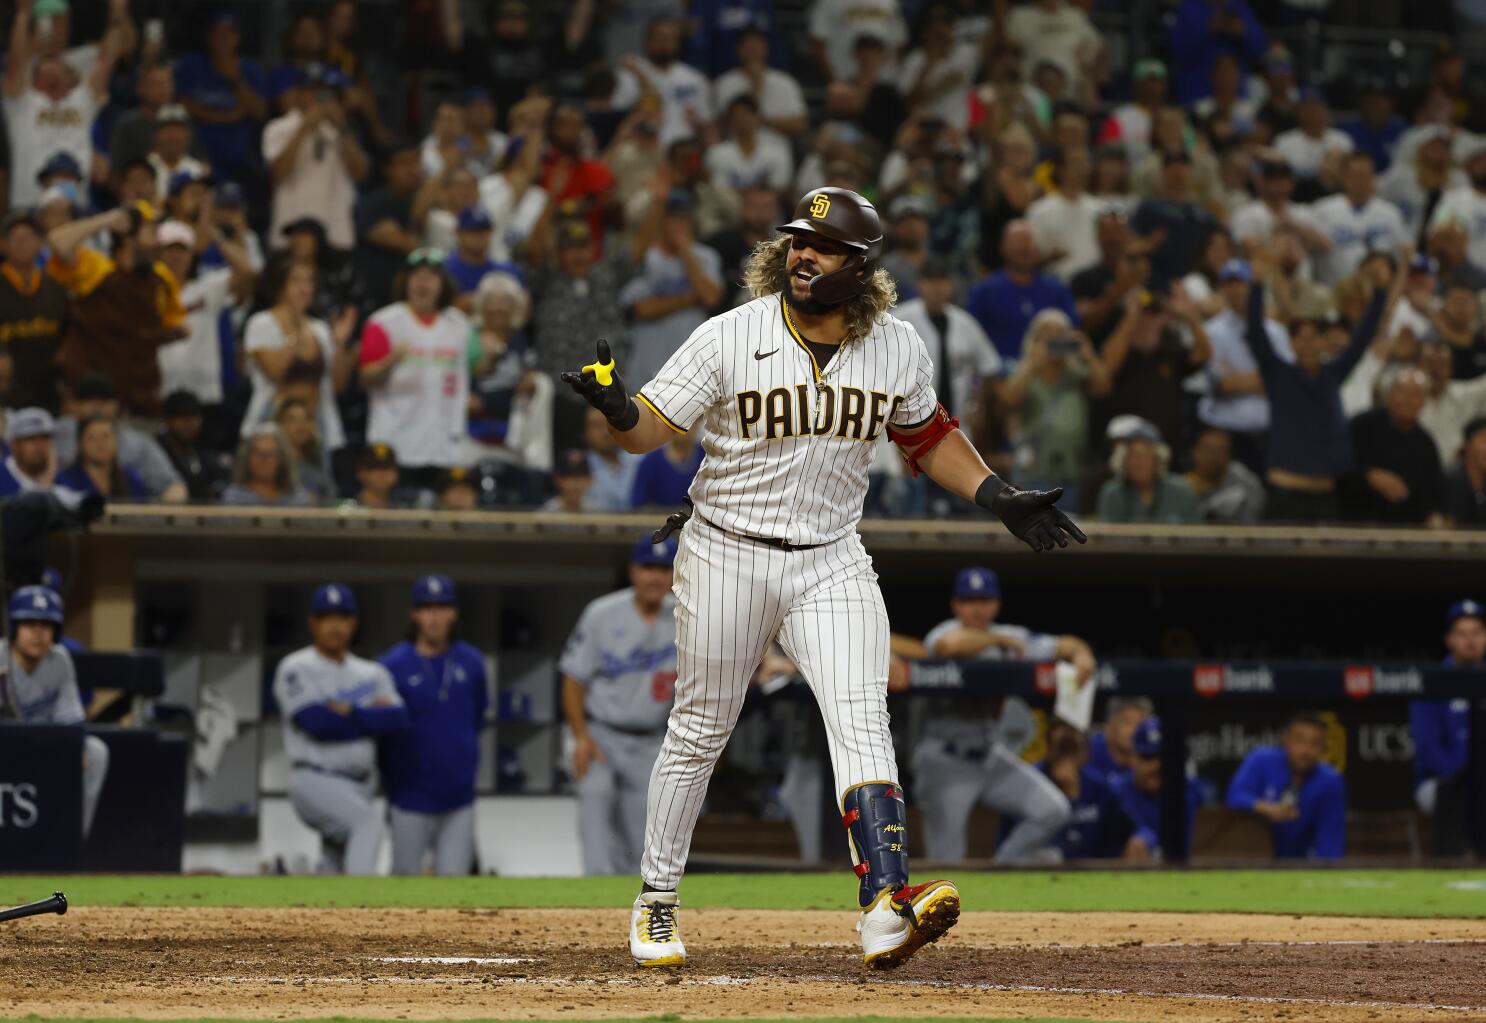 Padres take big step with walk-off victory over Dodgers in 10th - The San  Diego Union-Tribune